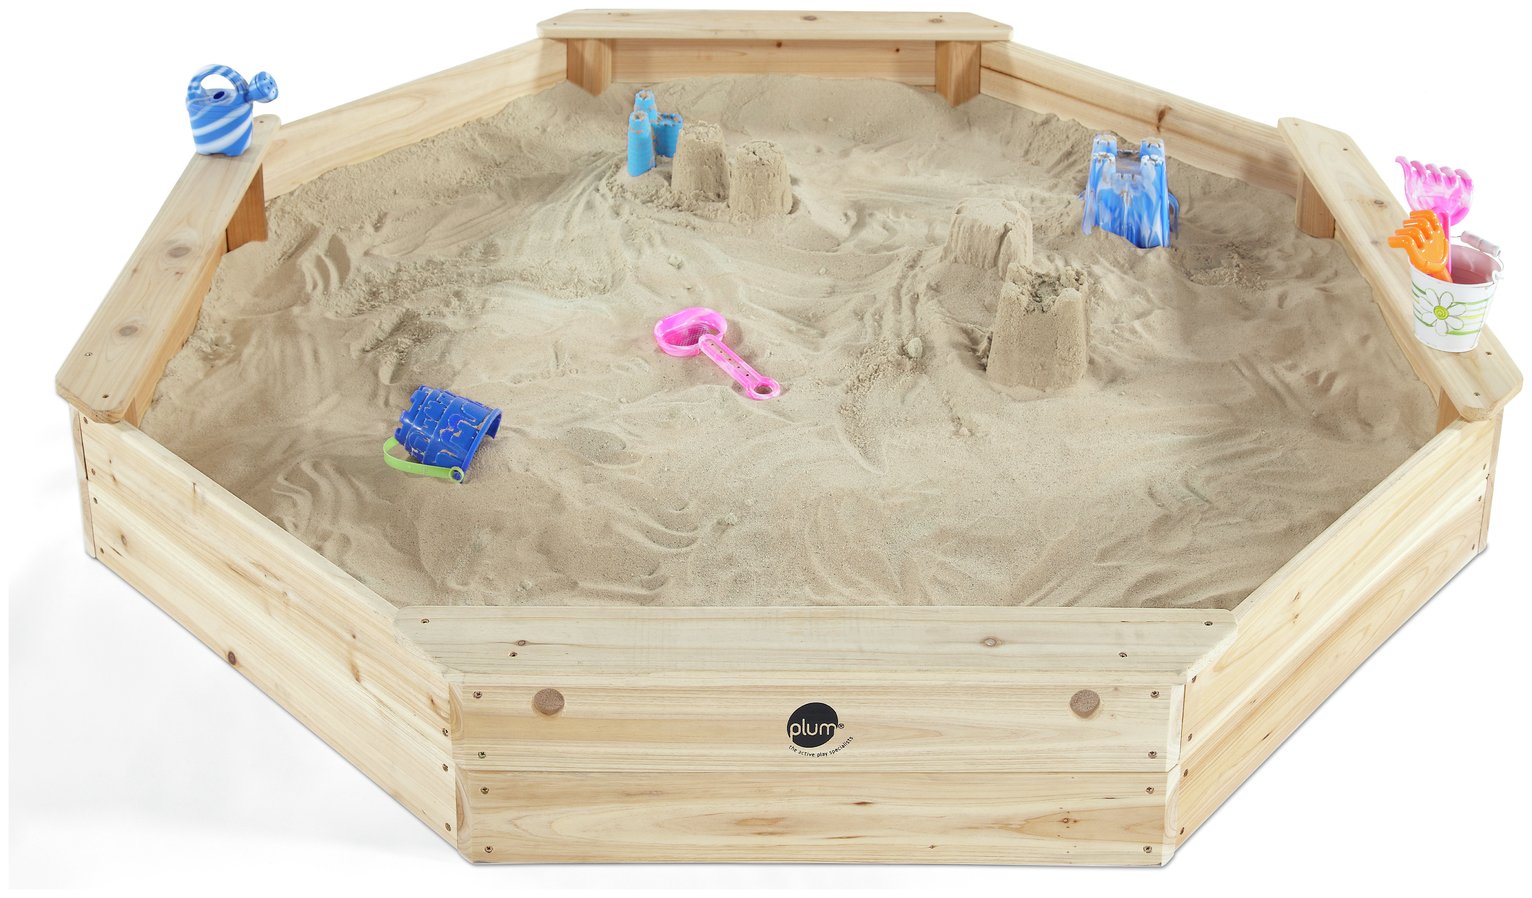 Plum Giant Wooden Sand Pit. Review